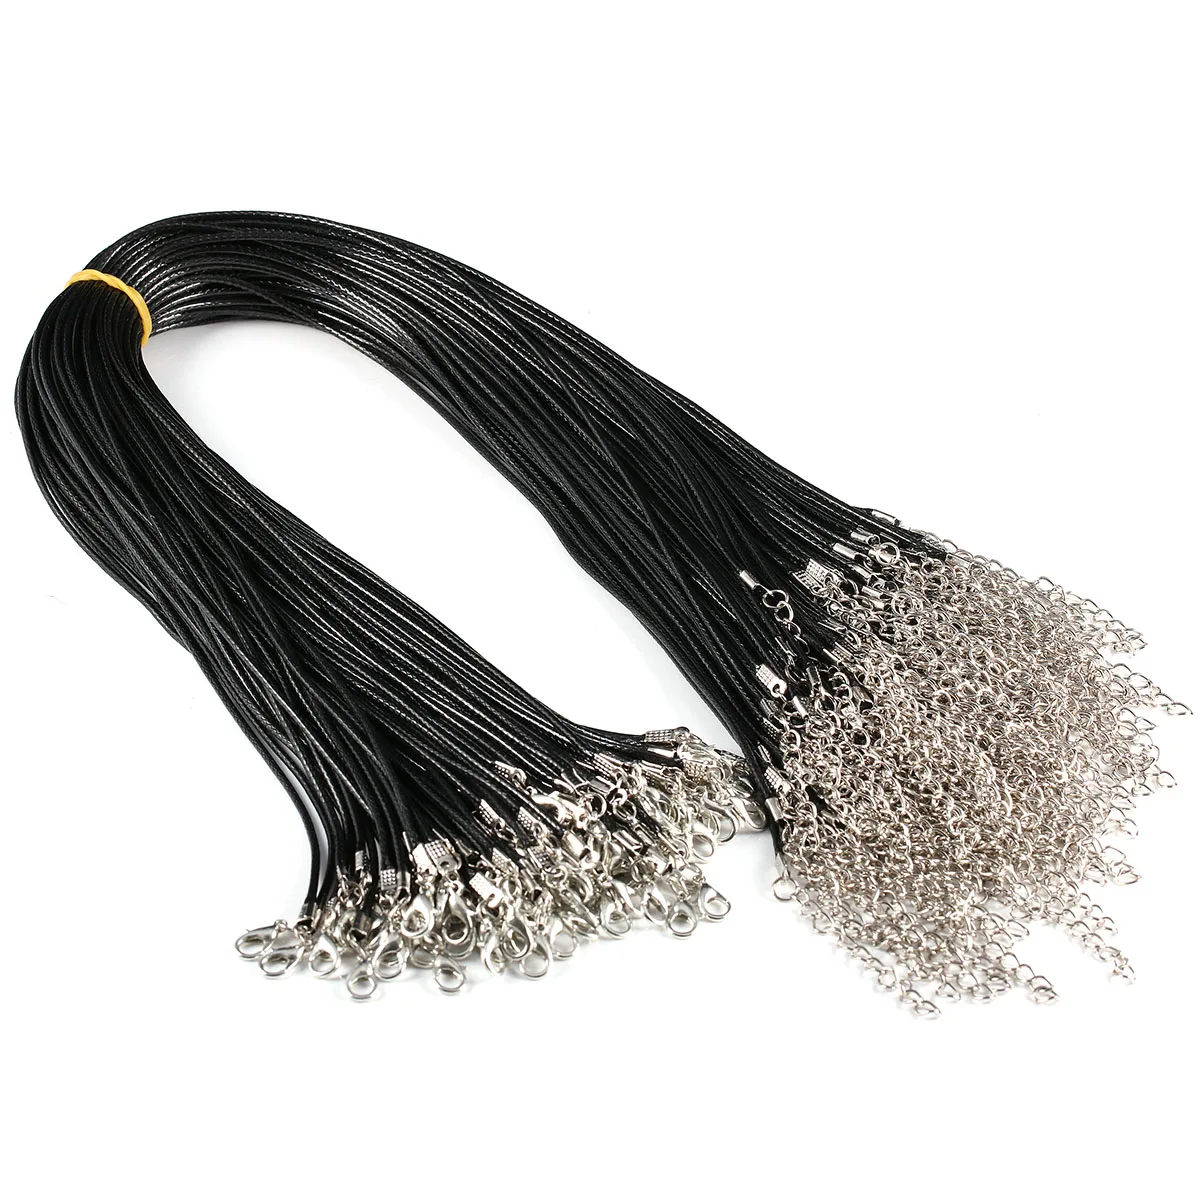 

10pcs Black PU Leather Cord Wax Rope Chain Necklace 45cm+5cm Stainless Steel Chains For DIY Jewelry Making Pendant Supplies